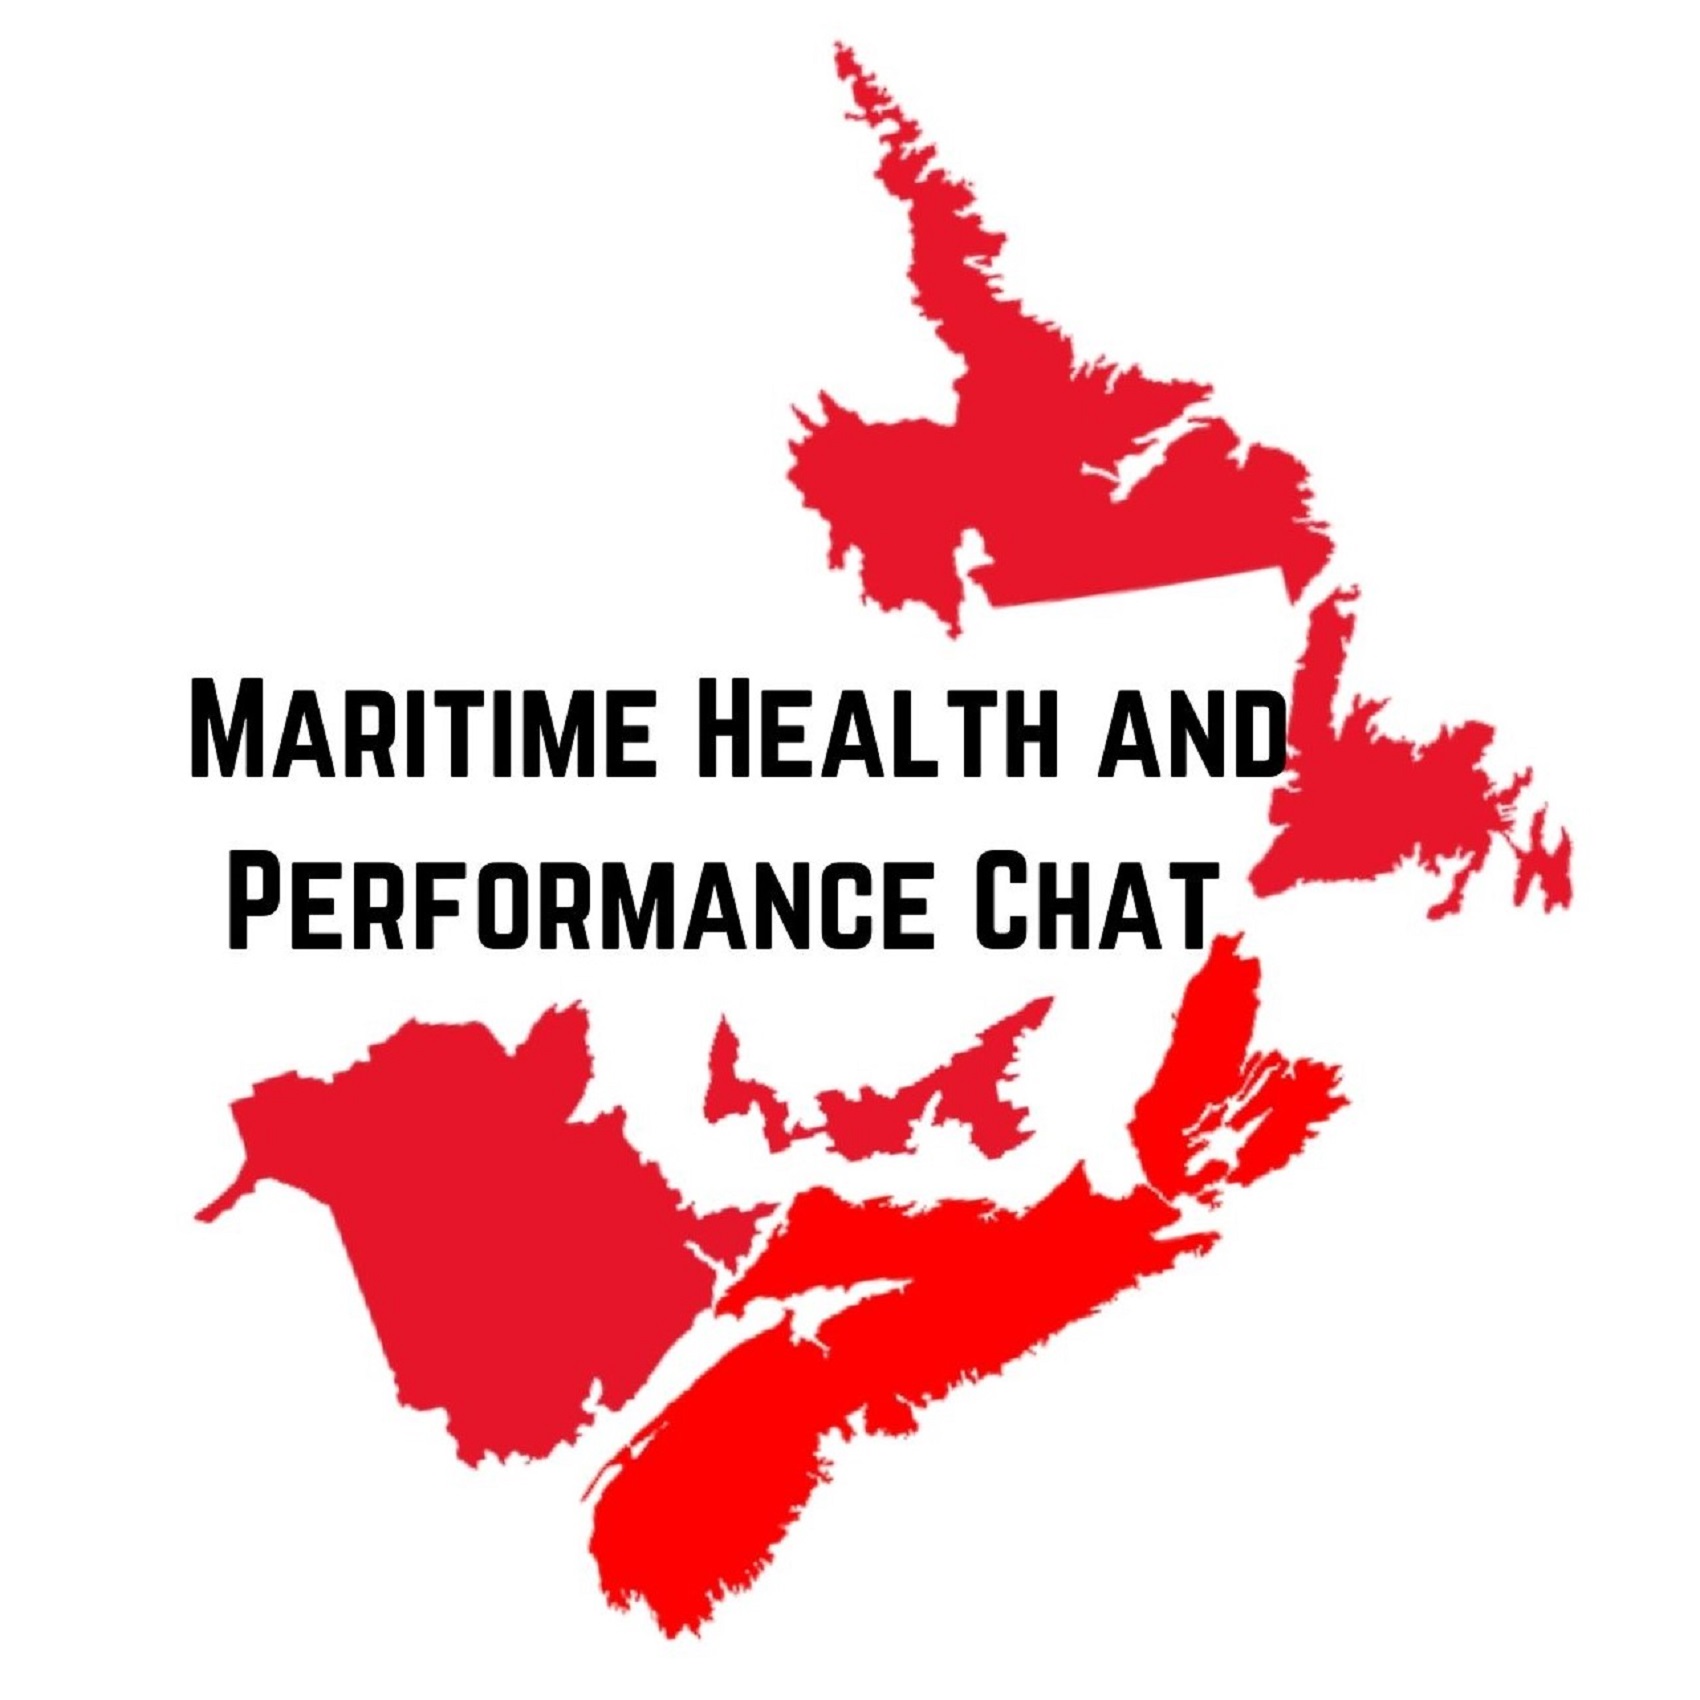 Maritime Health and Performance Chat